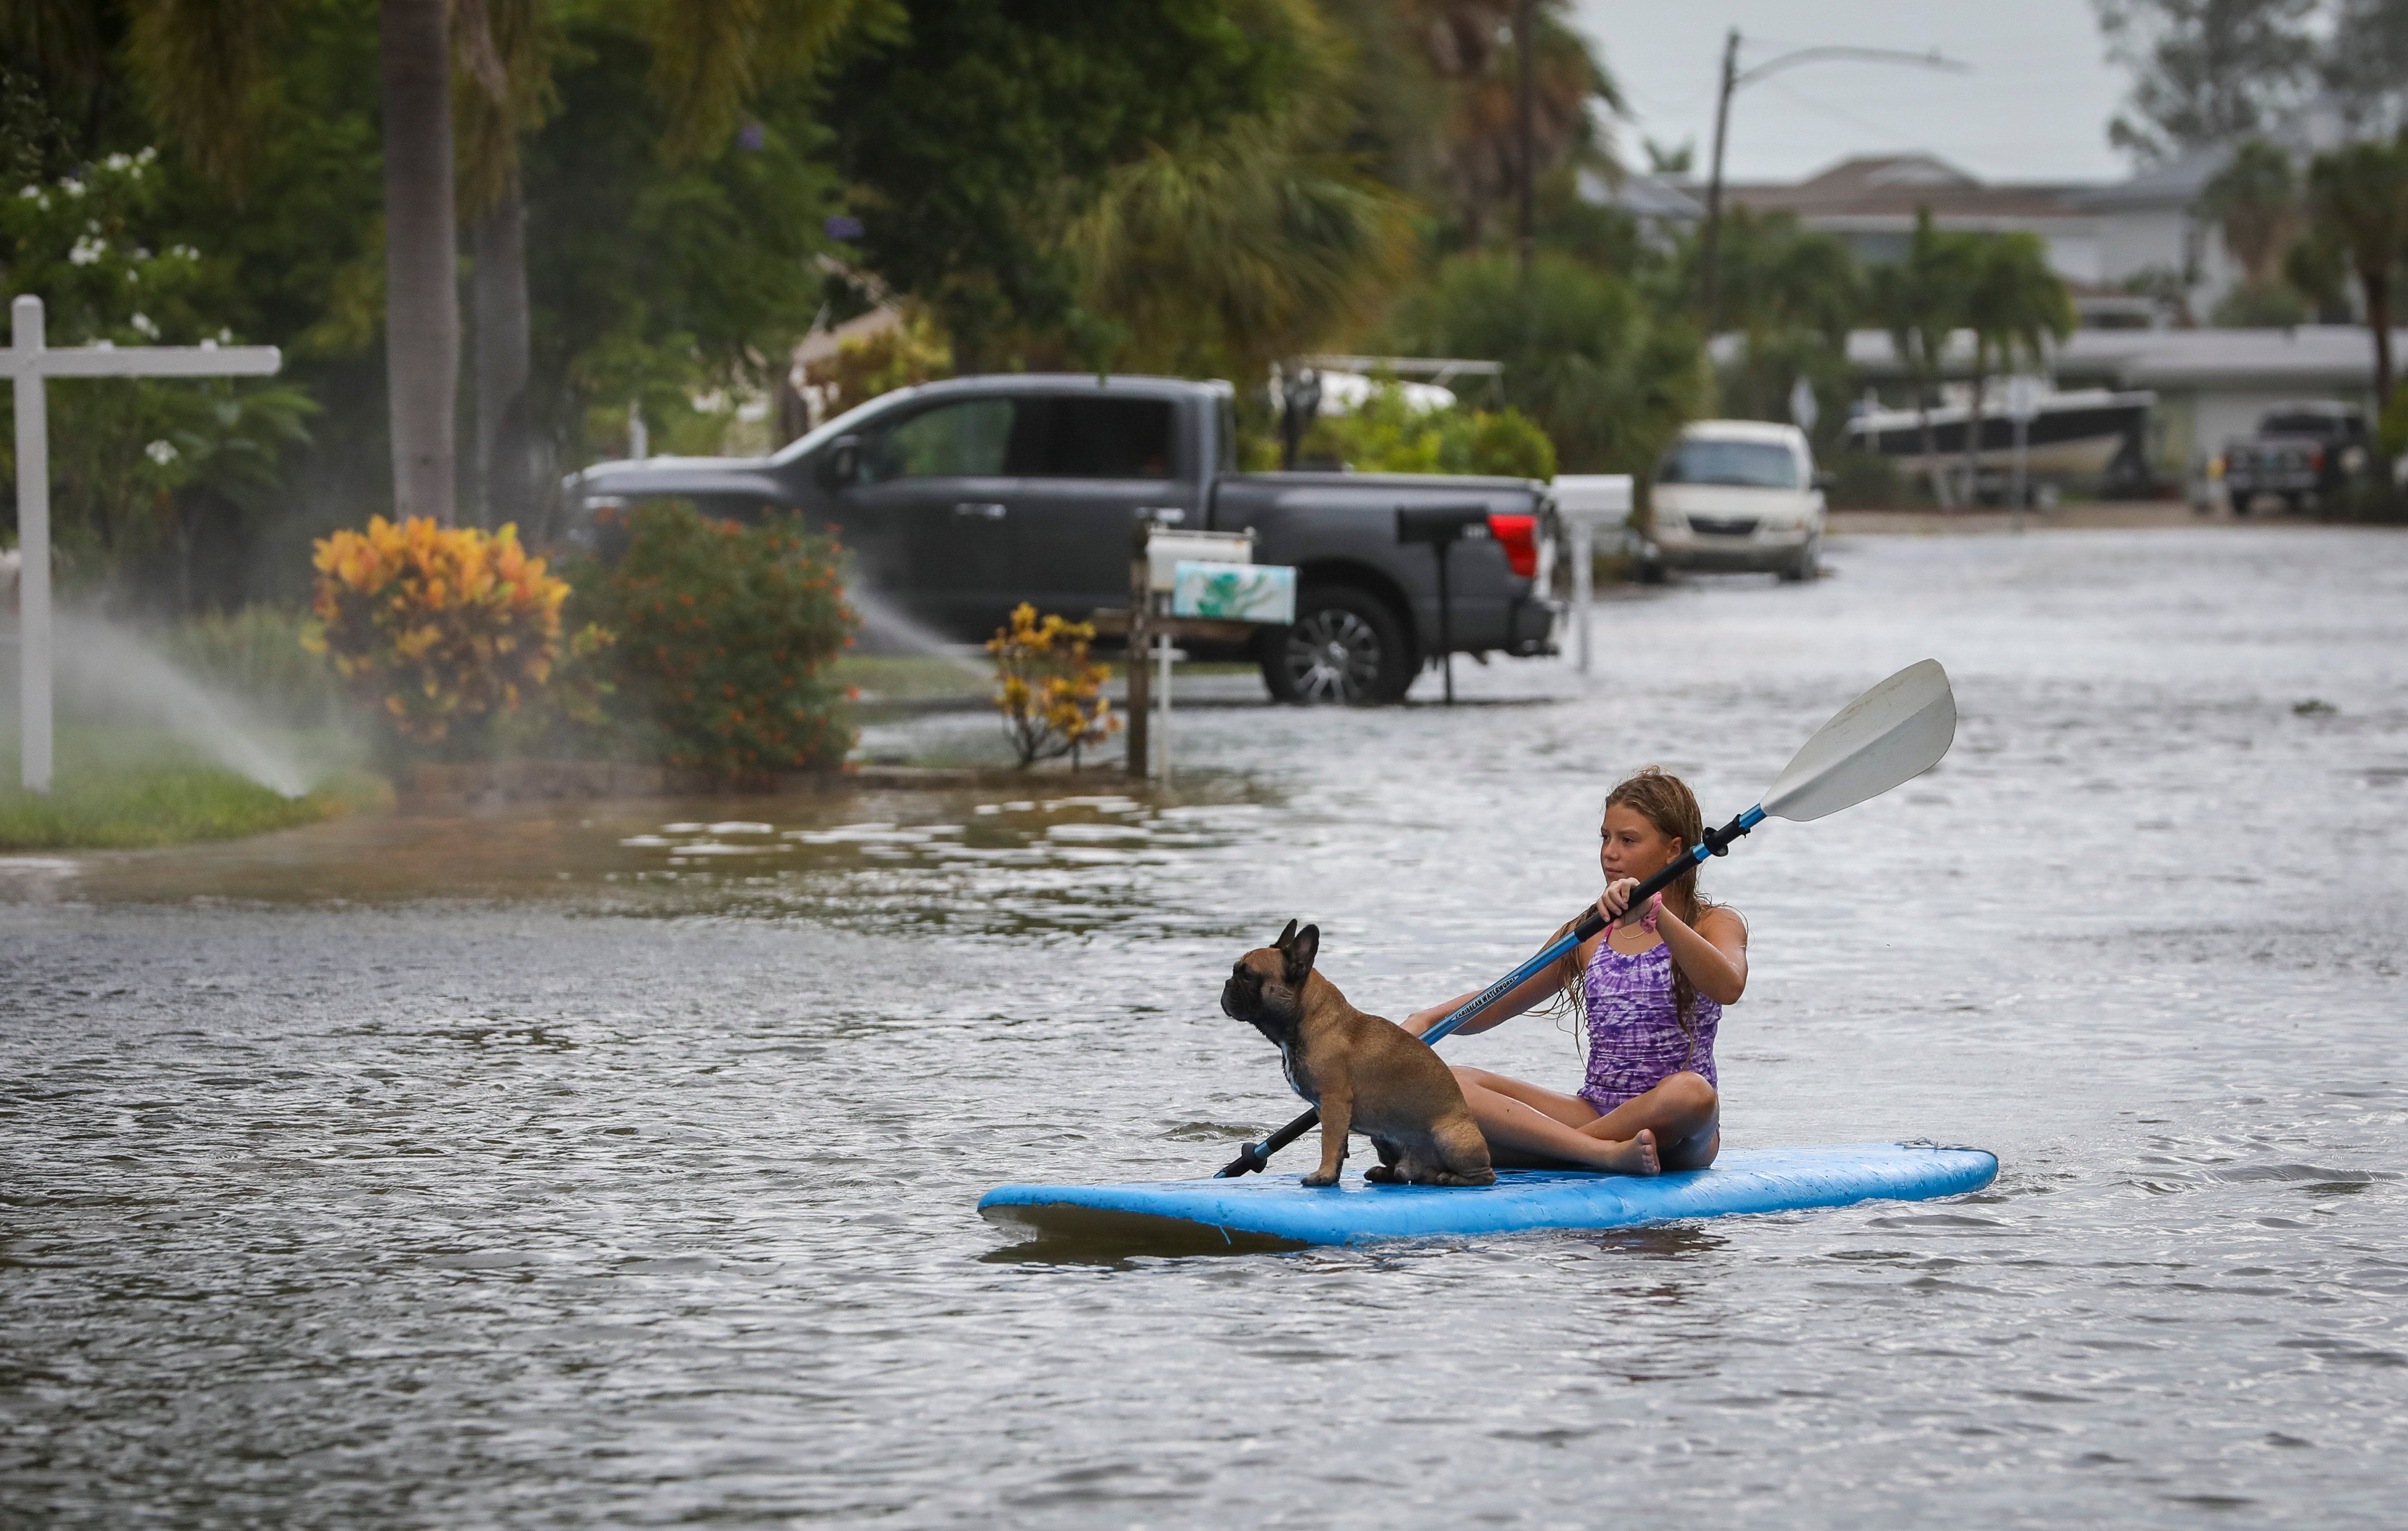 Lily Gumos, 11, of St. Pete Beach, Florida kayaks with her French bulldog along Blind Pass Road and 86th Avenue